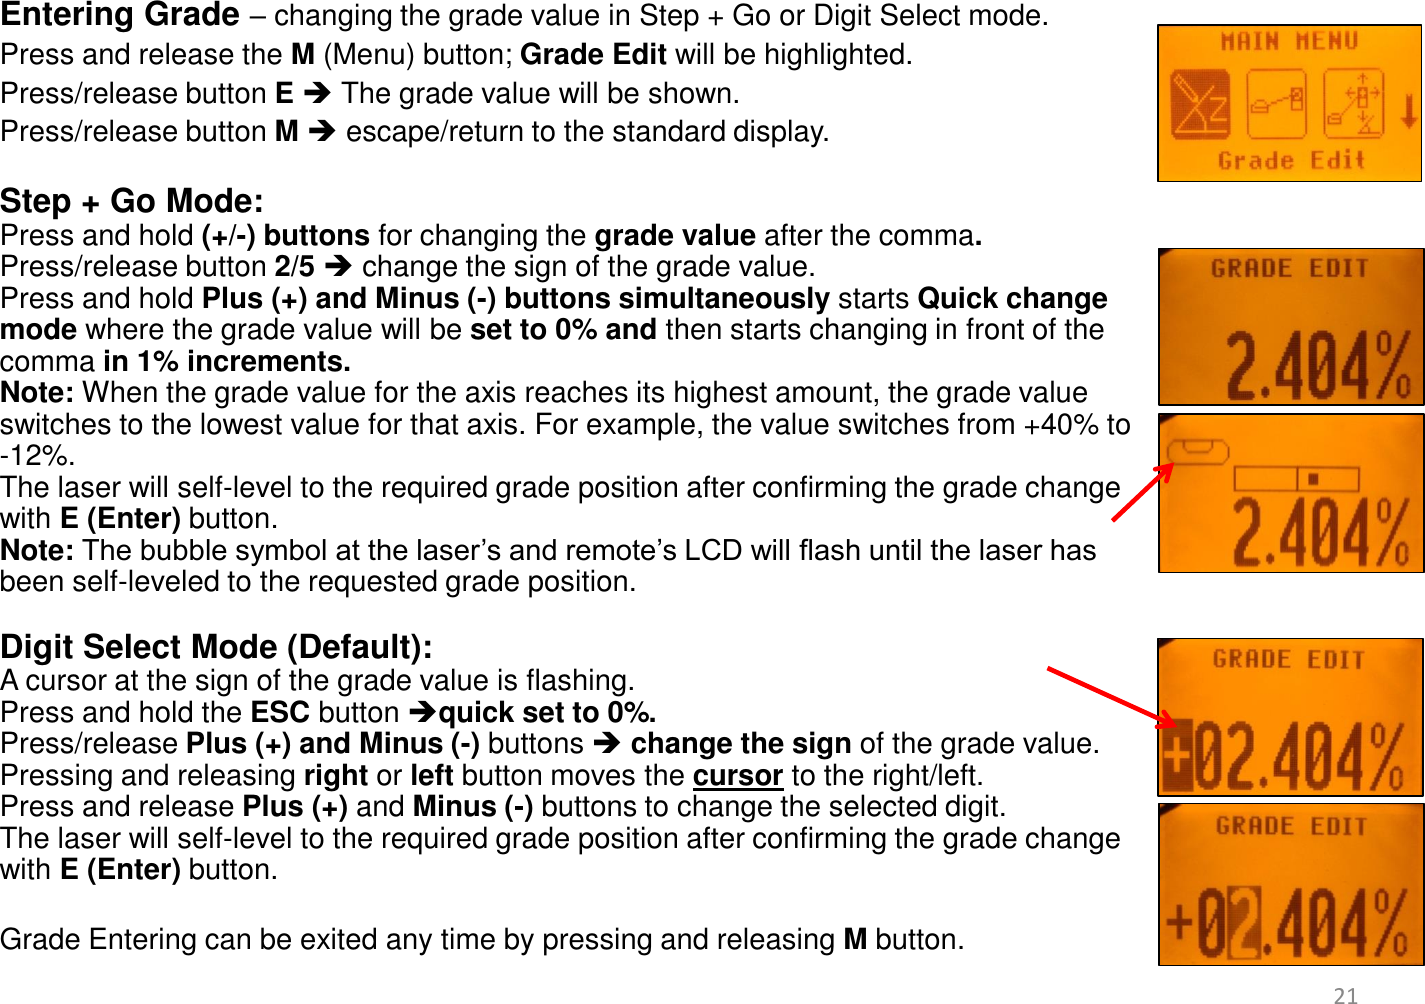 Entering Grade – changing the grade value in Step + Go or Digit Select mode. Press and release the M (Menu) button; Grade Edit will be highlighted.  Press/release button E  The grade value will be shown.  Press/release button M  escape/return to the standard display.  Step + Go Mode:  Press and hold (+/-) buttons for changing the grade value after the comma.  Press/release button 2/5  change the sign of the grade value. Press and hold Plus (+) and Minus (-) buttons simultaneously starts Quick change mode where the grade value will be set to 0% and then starts changing in front of the comma in 1% increments.  Note: When the grade value for the axis reaches its highest amount, the grade value switches to the lowest value for that axis. For example, the value switches from +40% to -12%. The laser will self-level to the required grade position after confirming the grade change with E (Enter) button.  Note: The bubble symbol at the laser’s and remote’s LCD will flash until the laser has been self-leveled to the requested grade position.  Digit Select Mode (Default):  A cursor at the sign of the grade value is flashing.  Press and hold the ESC button quick set to 0%. Press/release Plus (+) and Minus (-) buttons  change the sign of the grade value. Pressing and releasing right or left button moves the cursor to the right/left. Press and release Plus (+) and Minus (-) buttons to change the selected digit. The laser will self-level to the required grade position after confirming the grade change with E (Enter) button.   Grade Entering can be exited any time by pressing and releasing M button.    21 